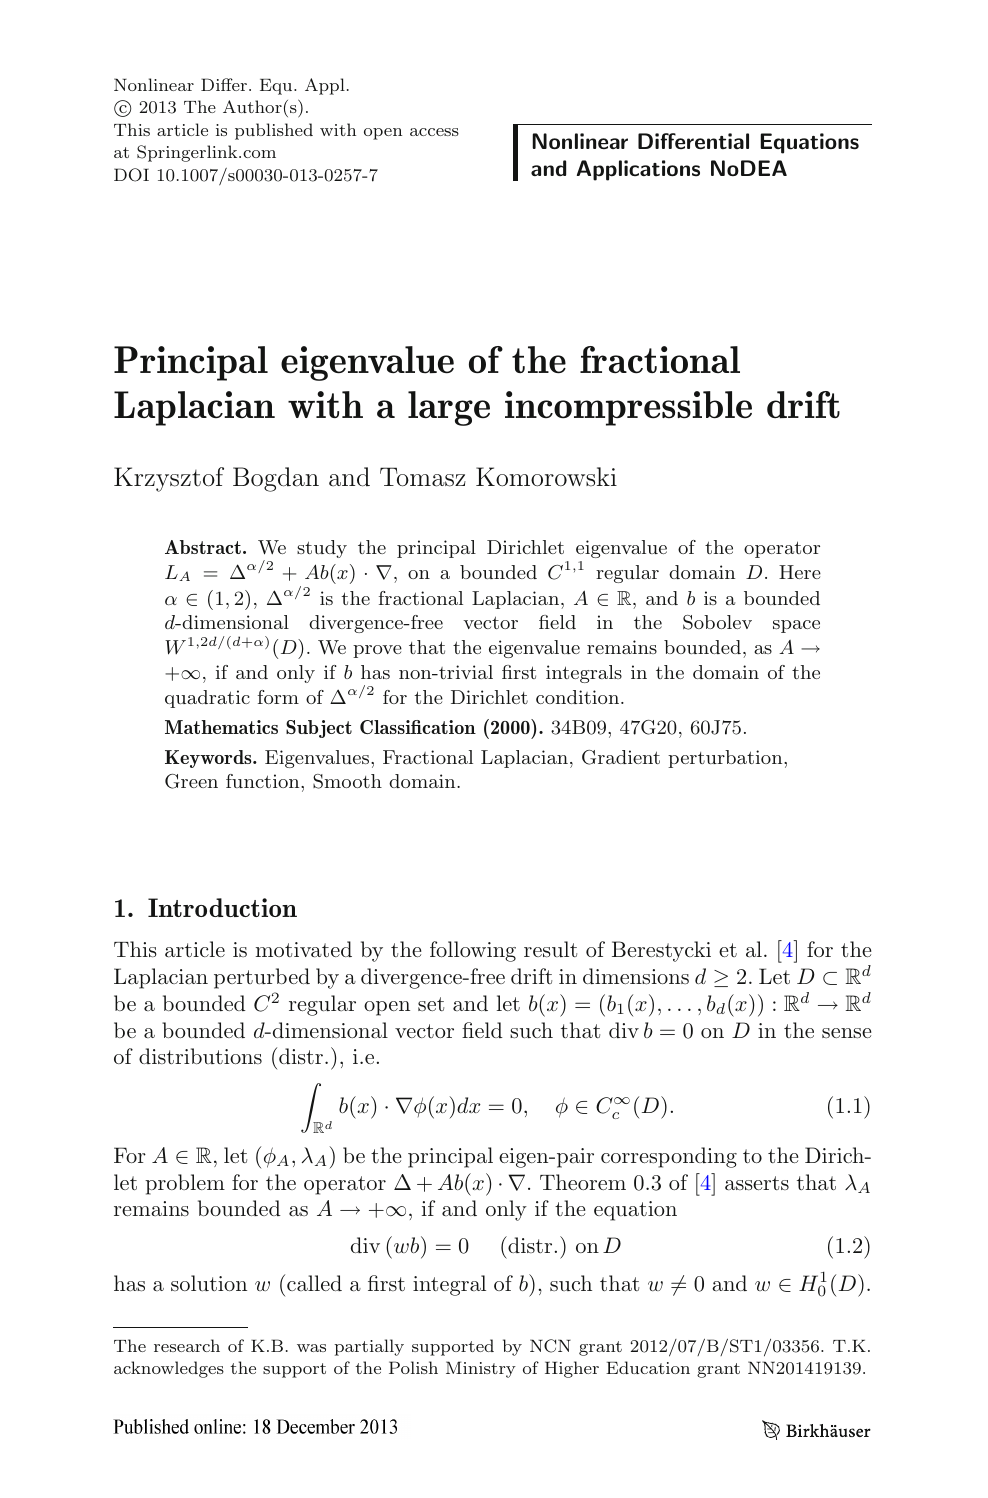 Principal Eigenvalue Of The Fractional Laplacian With A Large Incompressible Drift Topic Of Research Paper In Mathematics Download Scholarly Article Pdf And Read For Free On Cyberleninka Open Science Hub